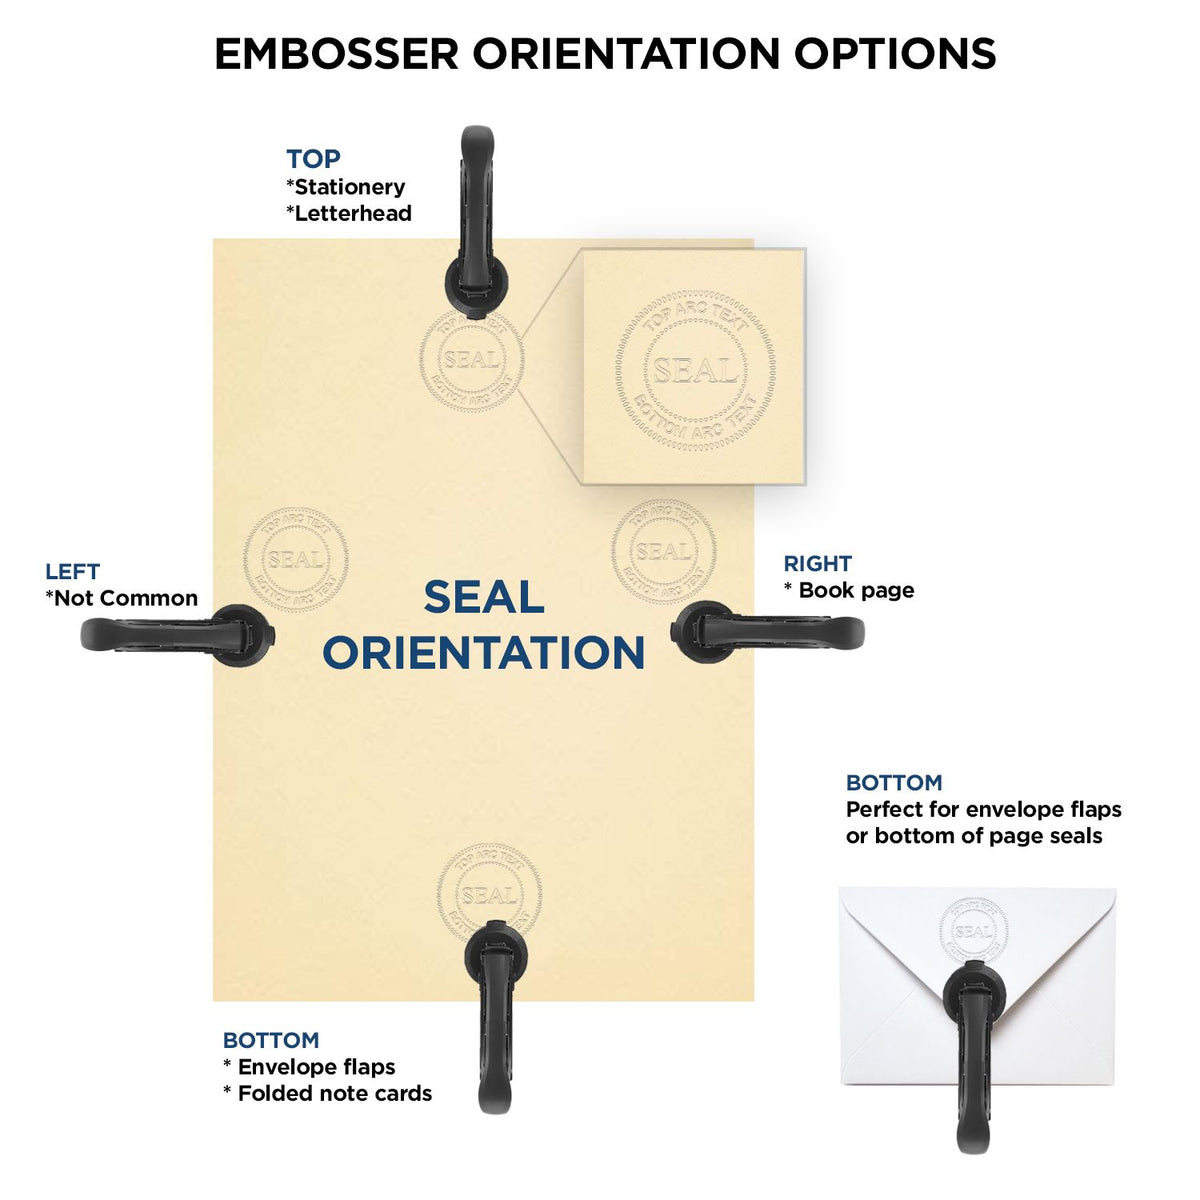 An infographic for the Handheld Arizona Professional Engineer Embosser showing embosser orientation, this is showing examples of a top, bottom, right and left insert.